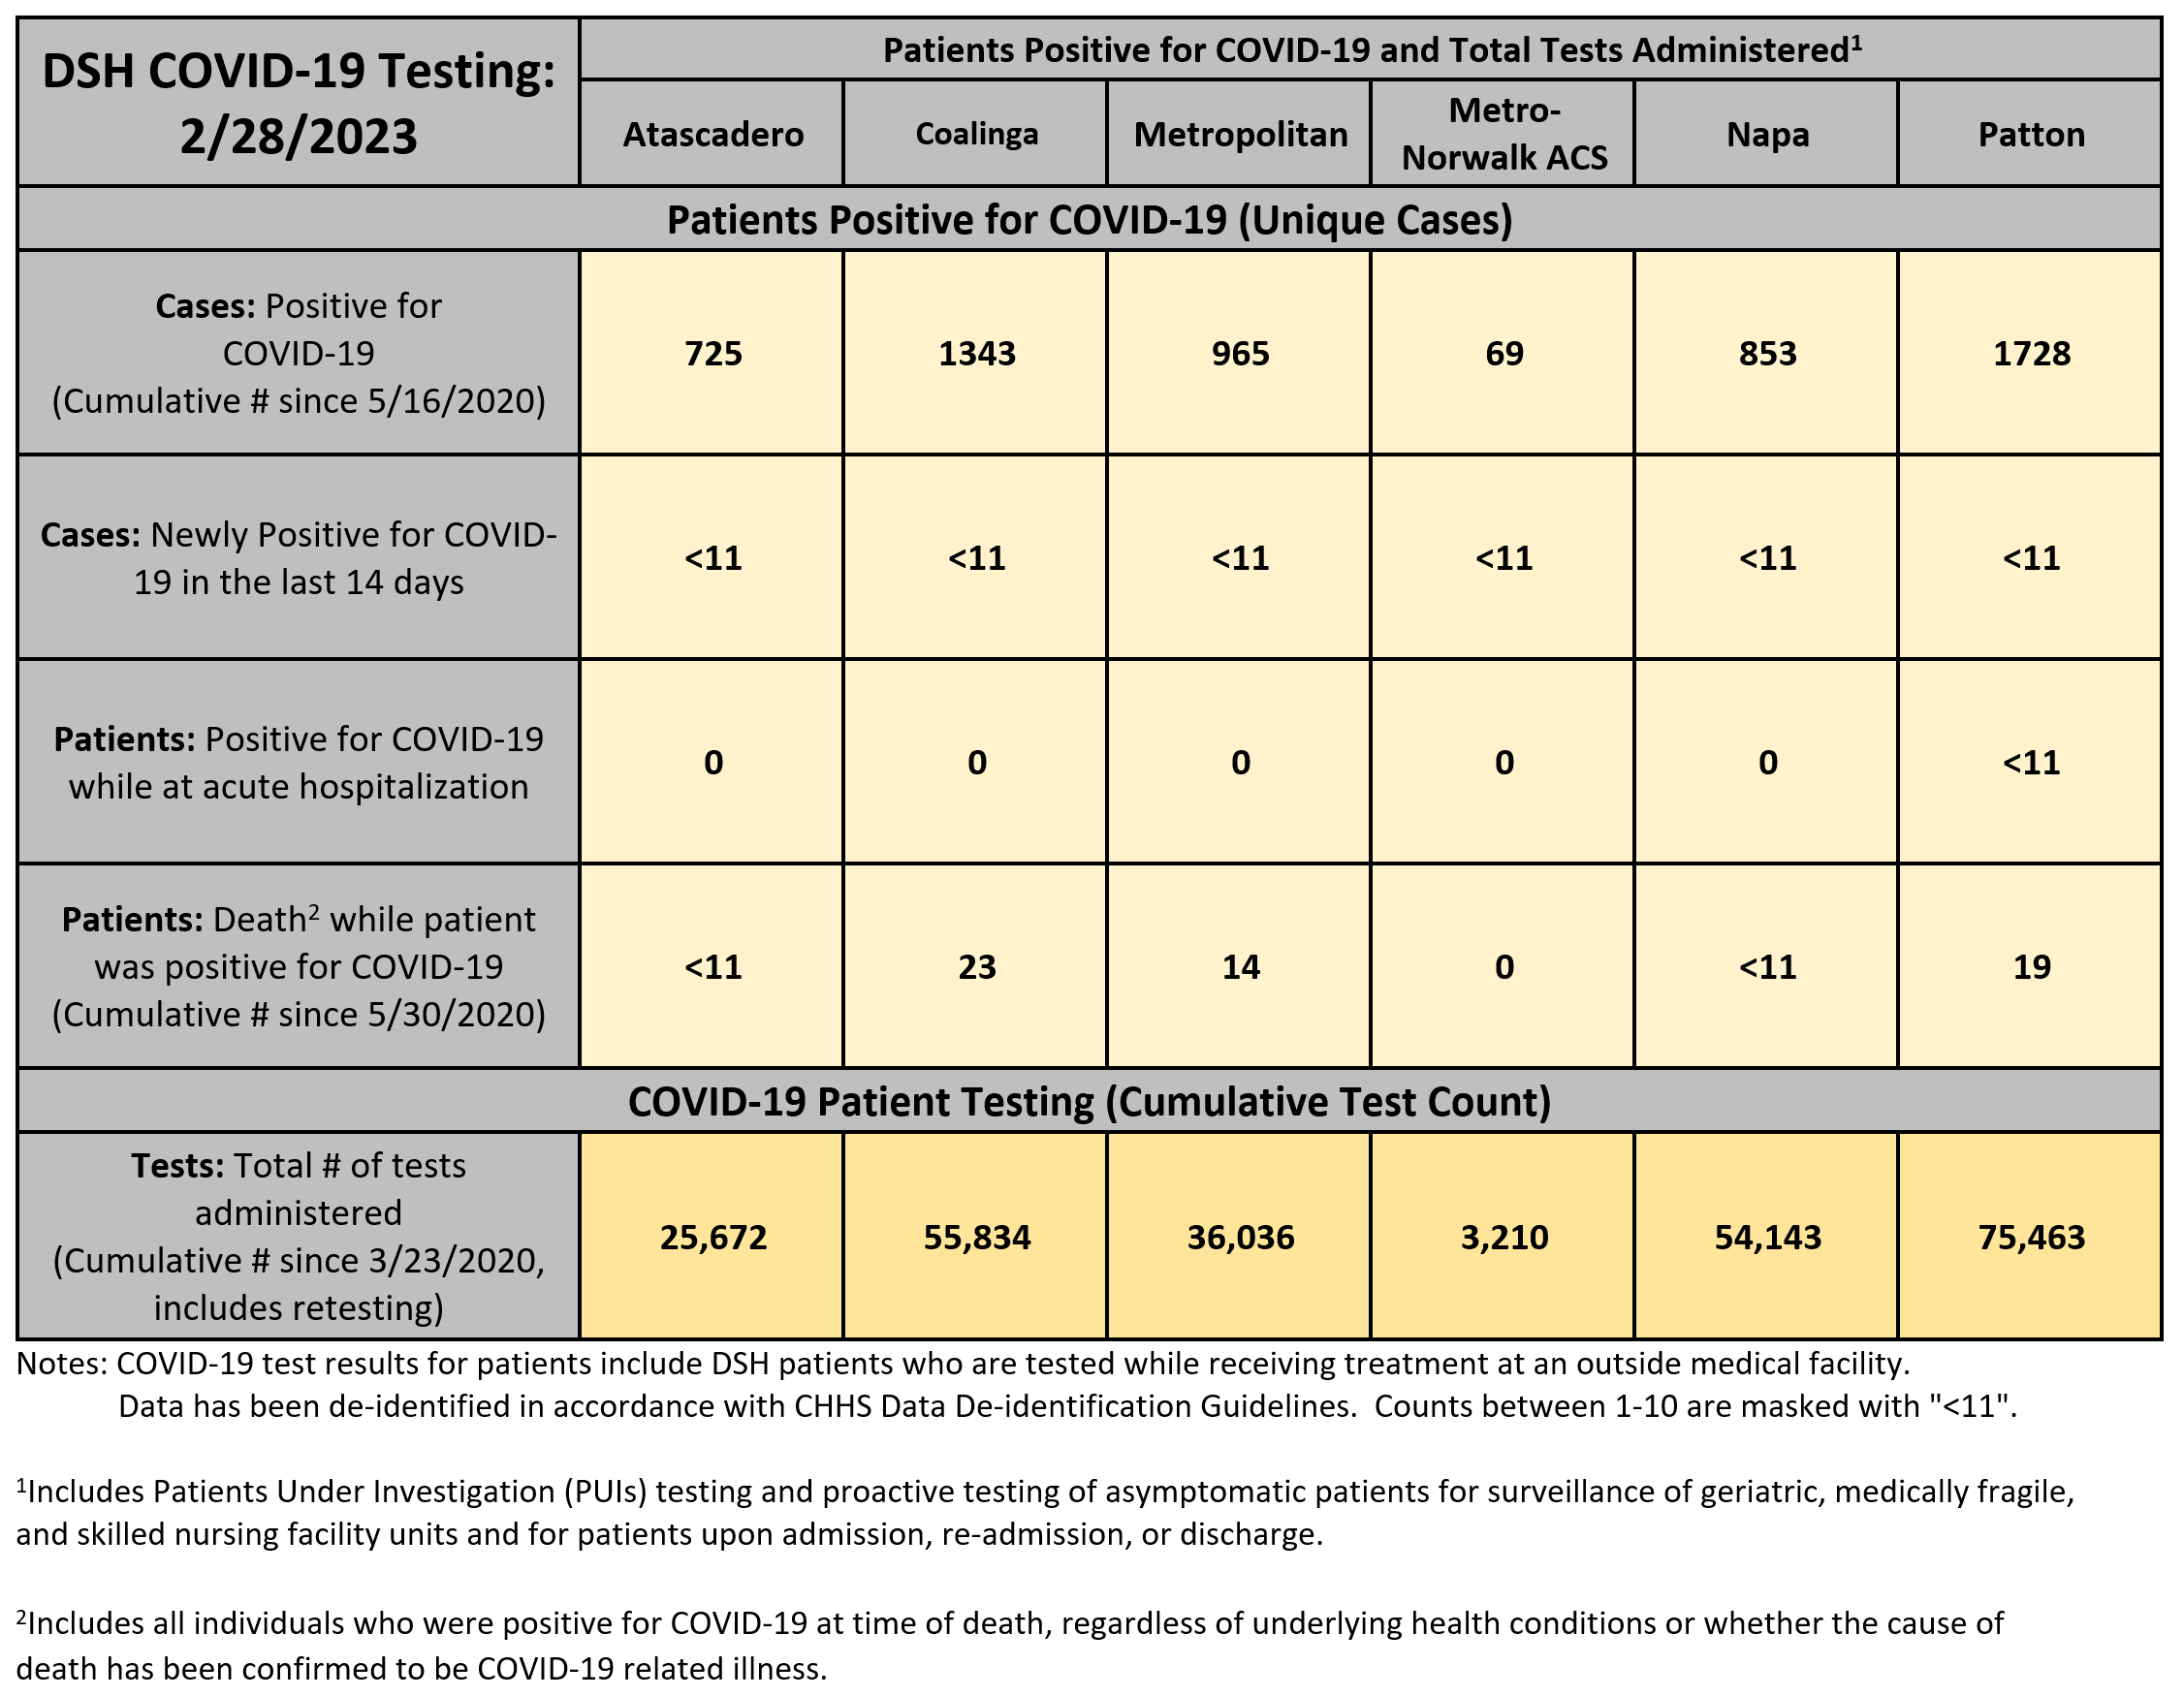 DSH COVID-19 Testing: As of 11/23/2022, Patients Positive for COVID-19 and Total Tests Administered, Cases: Positive for COVID-19 (Cumulative Number since 5/16/2020) - Atascadero: 584, Coalinga: 1133, Metropolitan: 872, Metro-Norwalk ACS: 48, Napa: 753, Patton: 1308 – Next Row: Cases: Newly Positive for COVID-19 in the last 14 days – Atascadero: 23, Coalinga: Less than 11, Metropolitan: 31, Metro-Norwalk ACS: Less than 11, Napa: Less than 11, Patton: 47 – Next Row: Patients: Positive for COVID-19 while at acute hospitalization – Atascadero: 0, Coalinga: 0, Metropolitan: 0, Metro-Norwalk ACS: 0, Napa: 0, Patton: Less than 11 – Next Row: Patients: Death² while patient was positive for COVID-19 (Cumulative Number since 5/30/2020) – Atascadero: Less Than 11, Coalinga: 23, Metropolitan: 14, Metro-Norwalk ACS: 0, Napa: Less Than 11, Patton: 19, next section - COVID-19 Testing (Cumulative Test Count), Tests: Total Number of tests administered(Cumulative Number since 3/23/2020, includes retesting) - Atascadero: 23,278, Coalinga: 48,668, Metropolitan: 32,168, Metro-Norwalk ACS: 2,980, Napa: 49,395, Patton: 66,372. subnotes: COVID-19 test results for patients include DSH patients who are tested while receiving treatment at an outside medical facility. Data has been de-identified in accordance with CHHS Data De-identification Guidelines. Counts between 1-10 are masked with Less than 11.   Includes Patients Under Investigation (PUIs) testing and proactive testing of asymptomatic patients for surveillance of geriatric, medically fragile, and skilled nursing facility units and for patients upon admission, re-admission, or discharge. Includes all individuals who were positive for COVID-19 at time of death, regardless of underlying health conditions or whether the cause of death has been confirmed to be COVID-19 related illness.